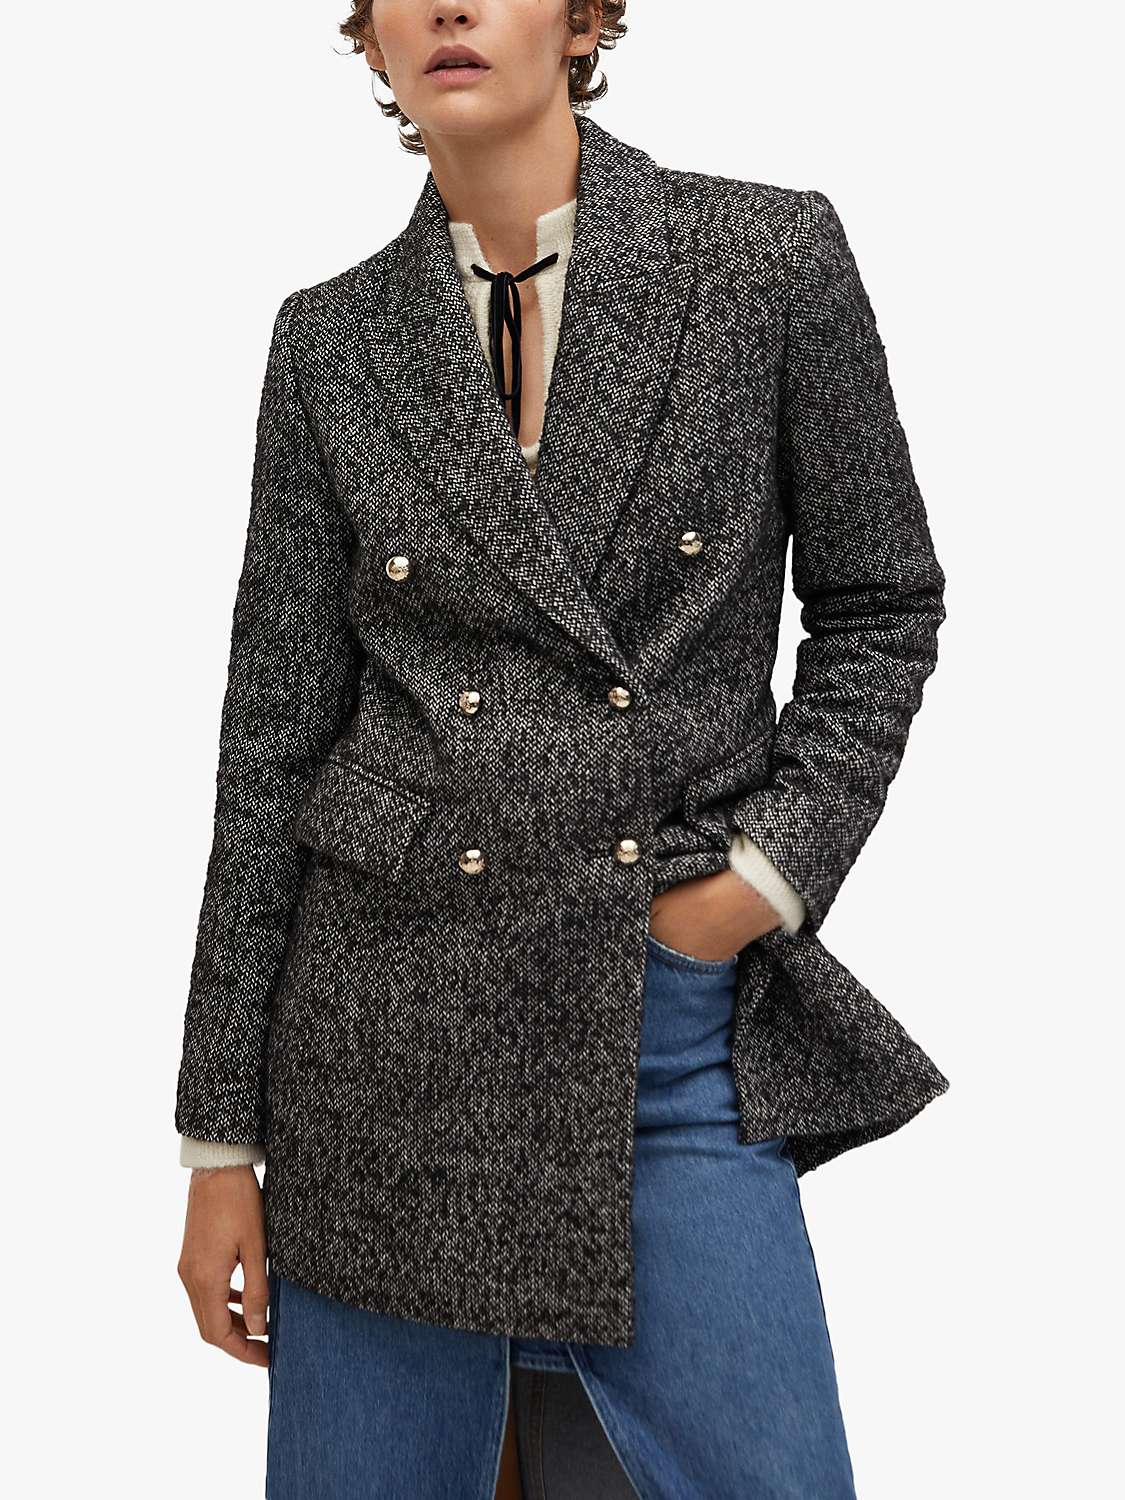 Mango Textured Double Breasted Wrap Coat, Grey at John Lewis & Partners